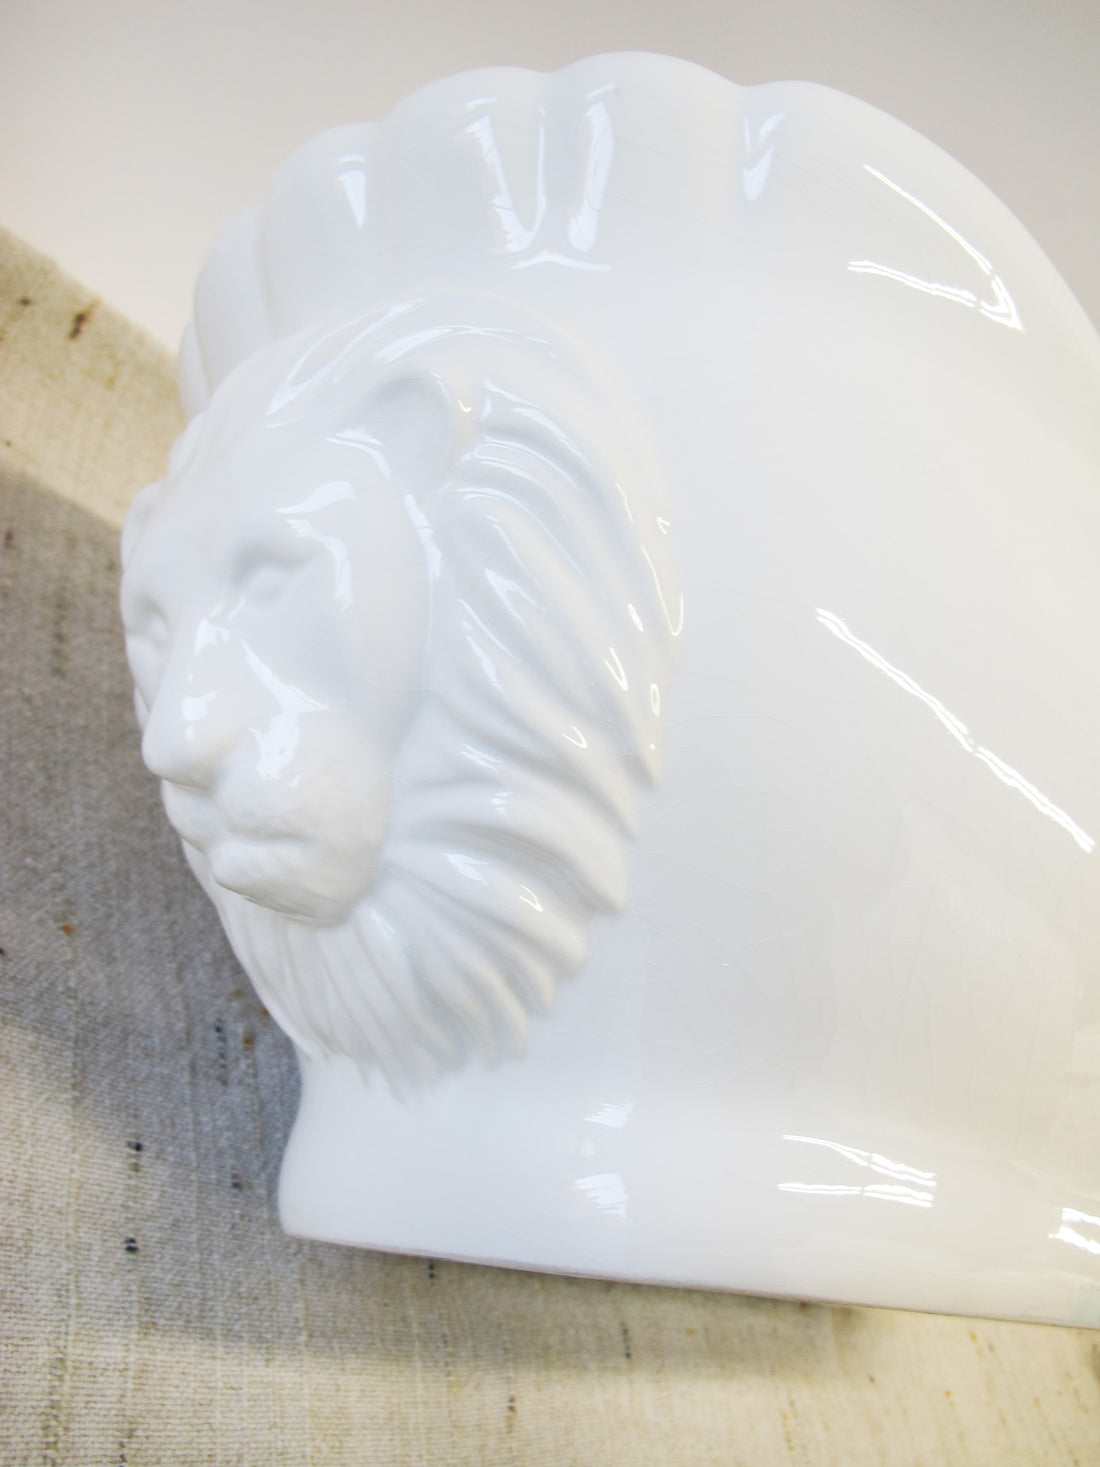 Large Italian White Ceramic Serving Bowl with Lions Heads